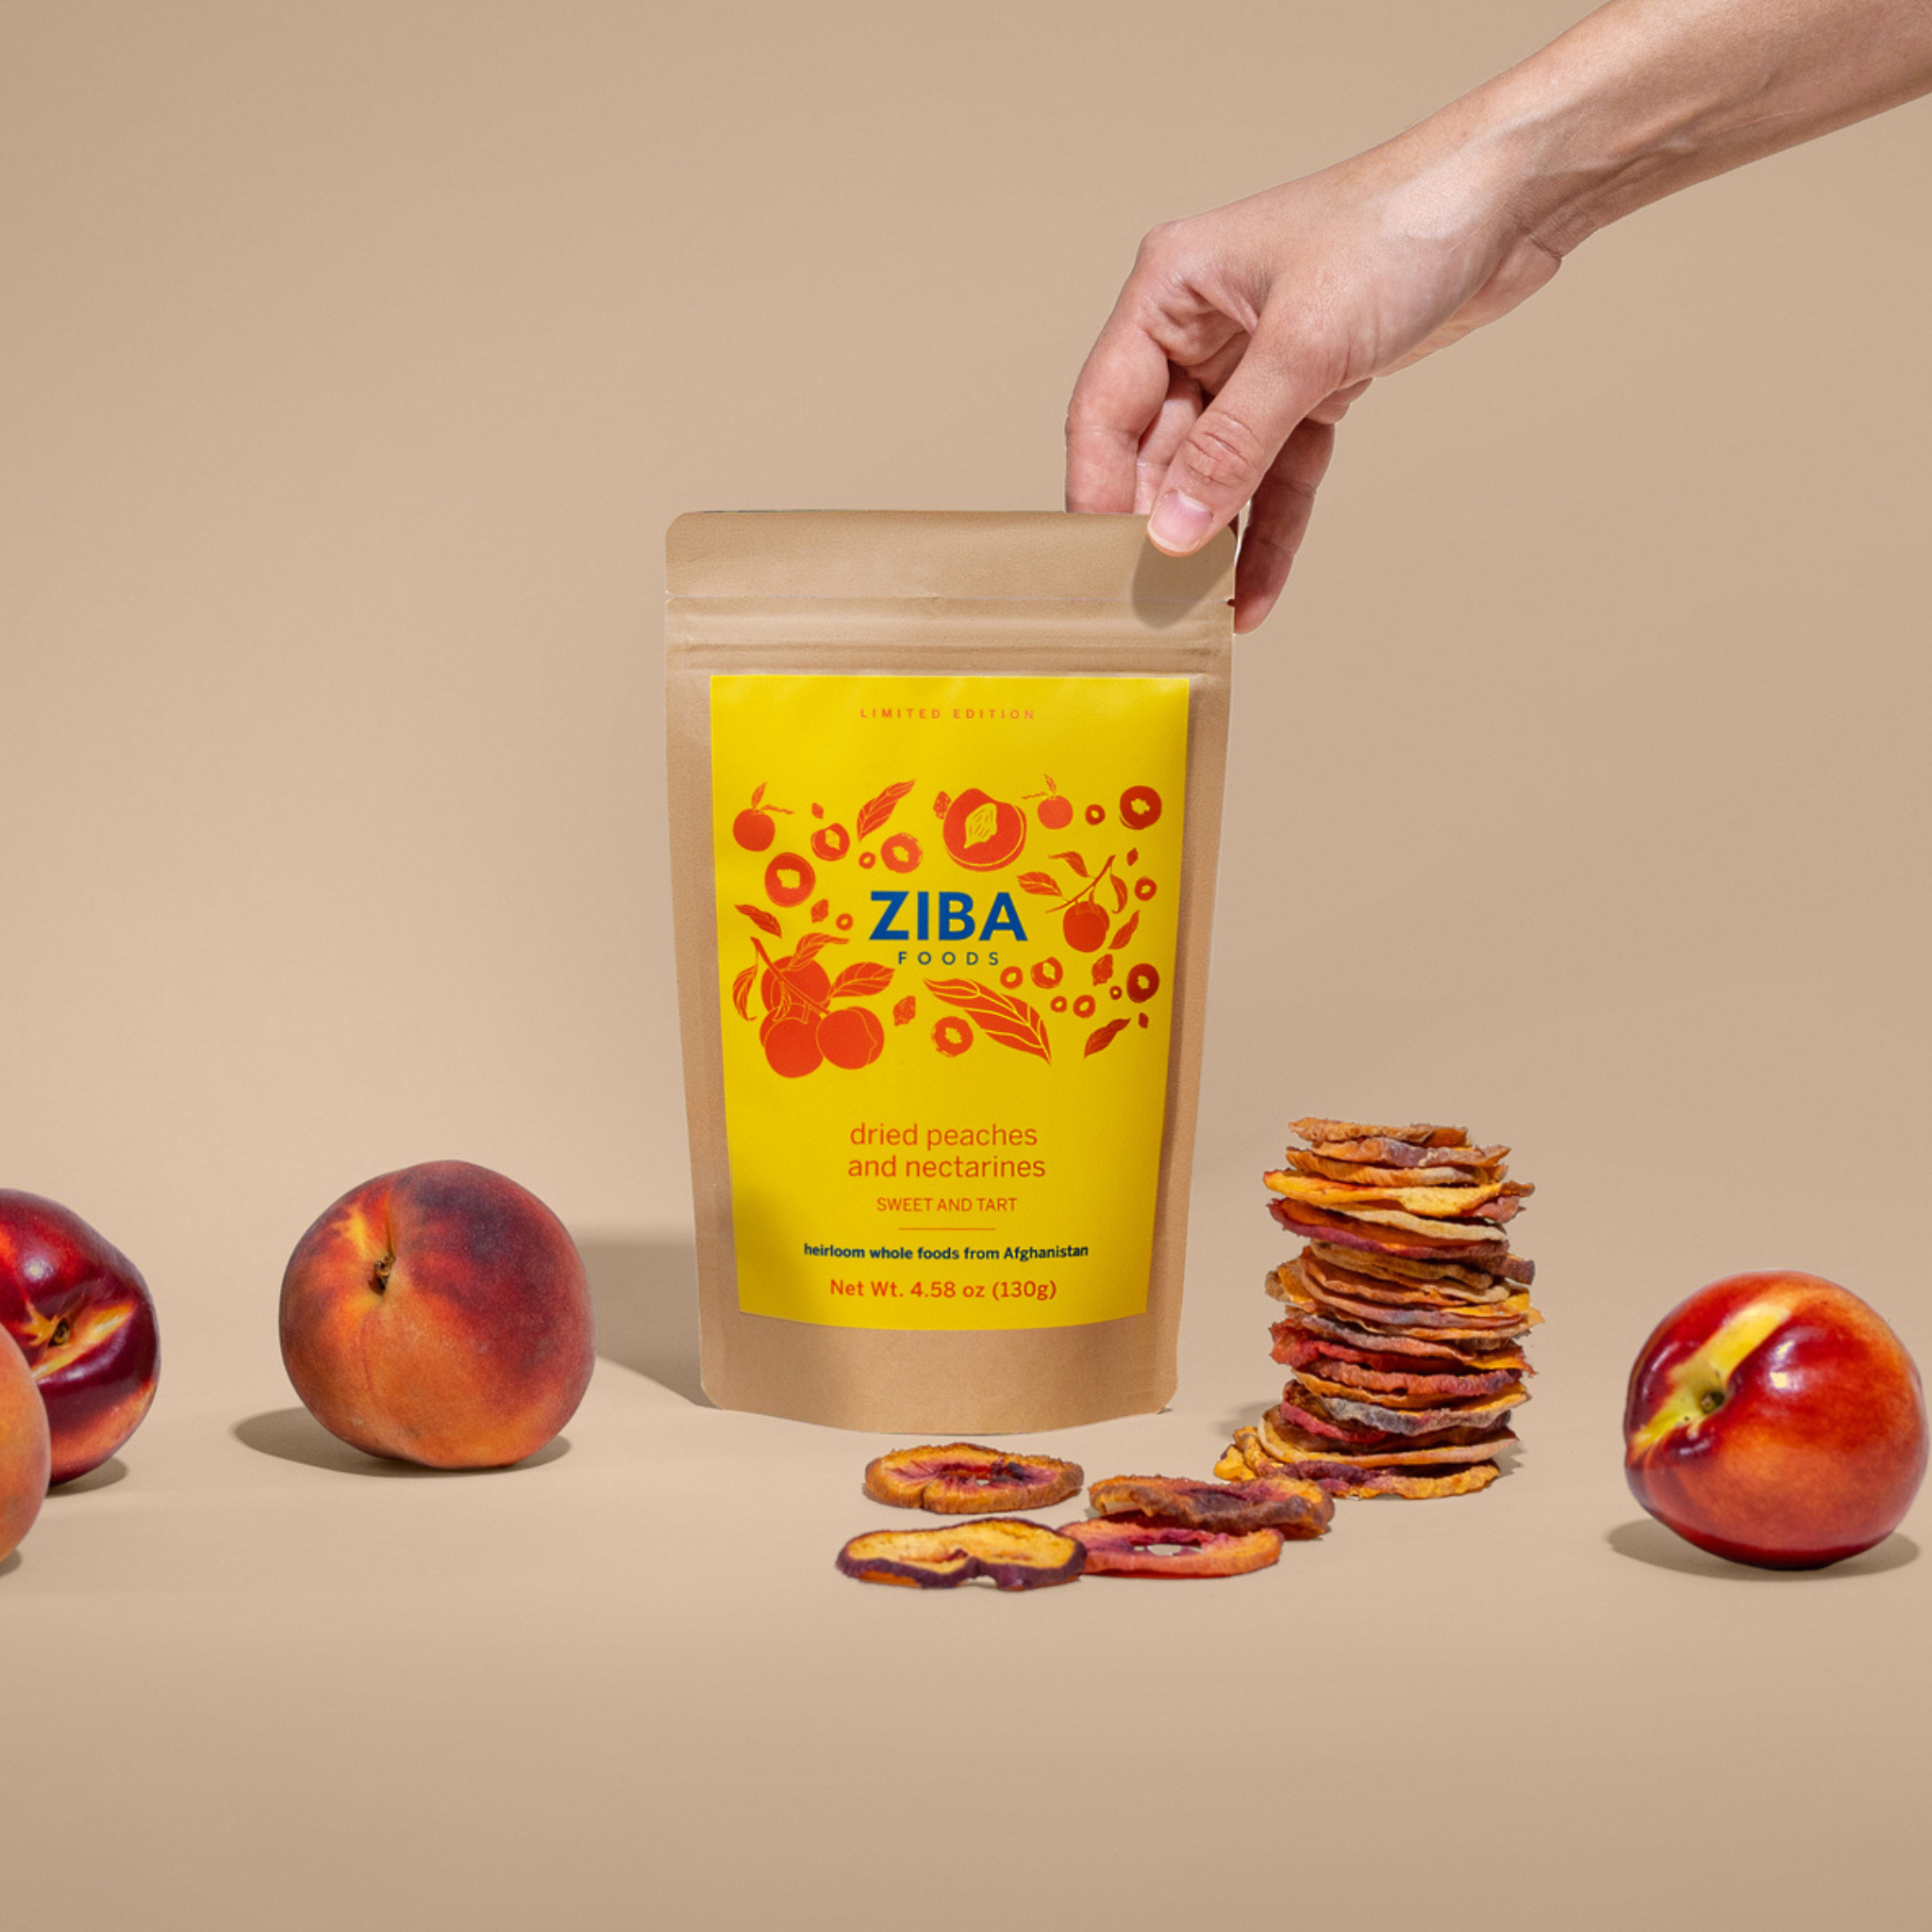 LIMITED EDITION - Dried Peaches & Nectarines - 4.58oz Bag